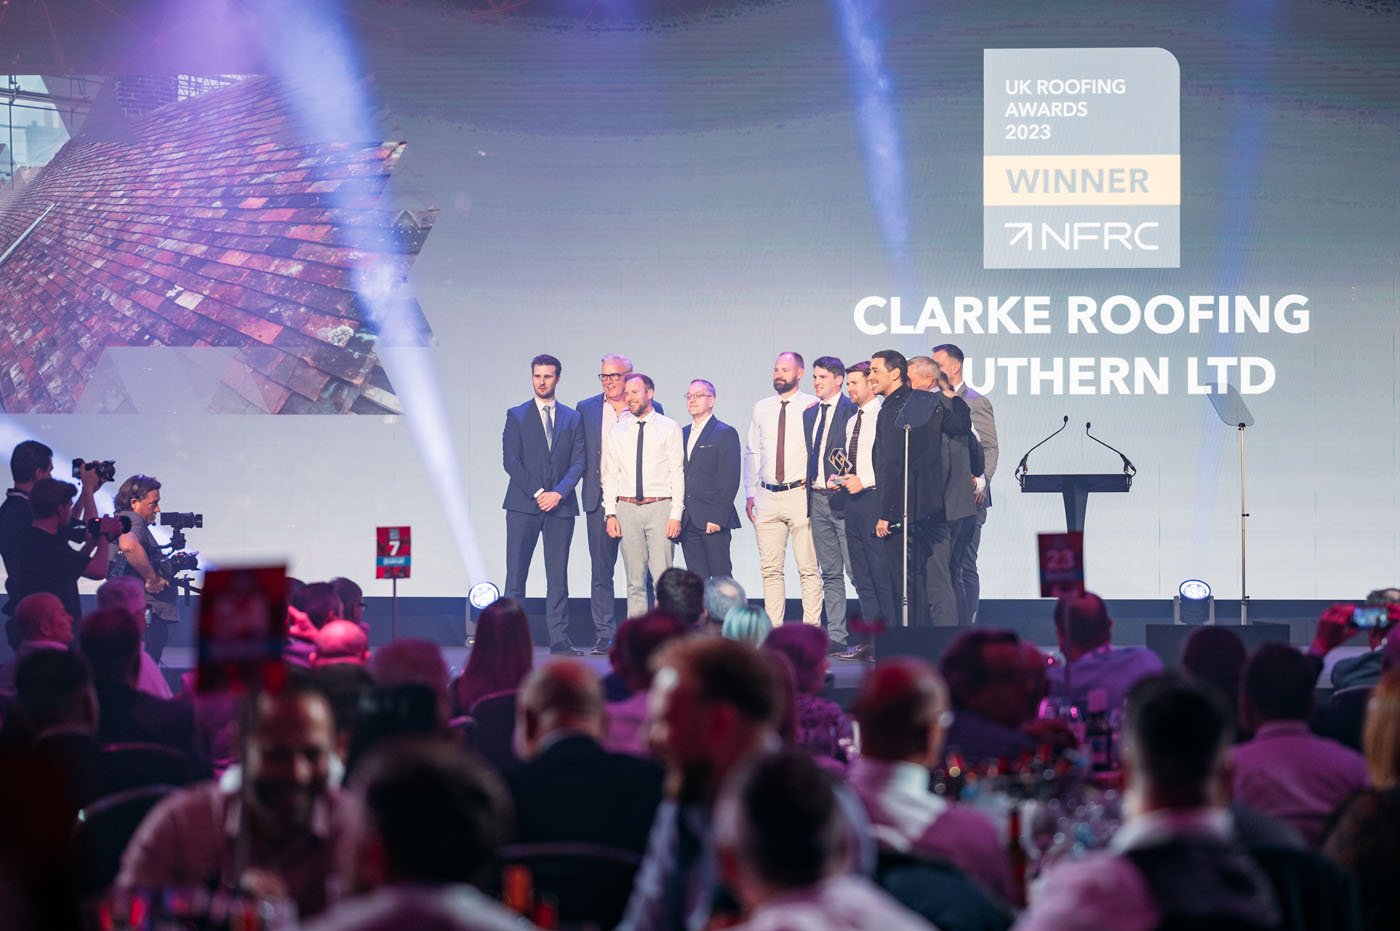 Roof Tiling winner Clarke Roofing Southern